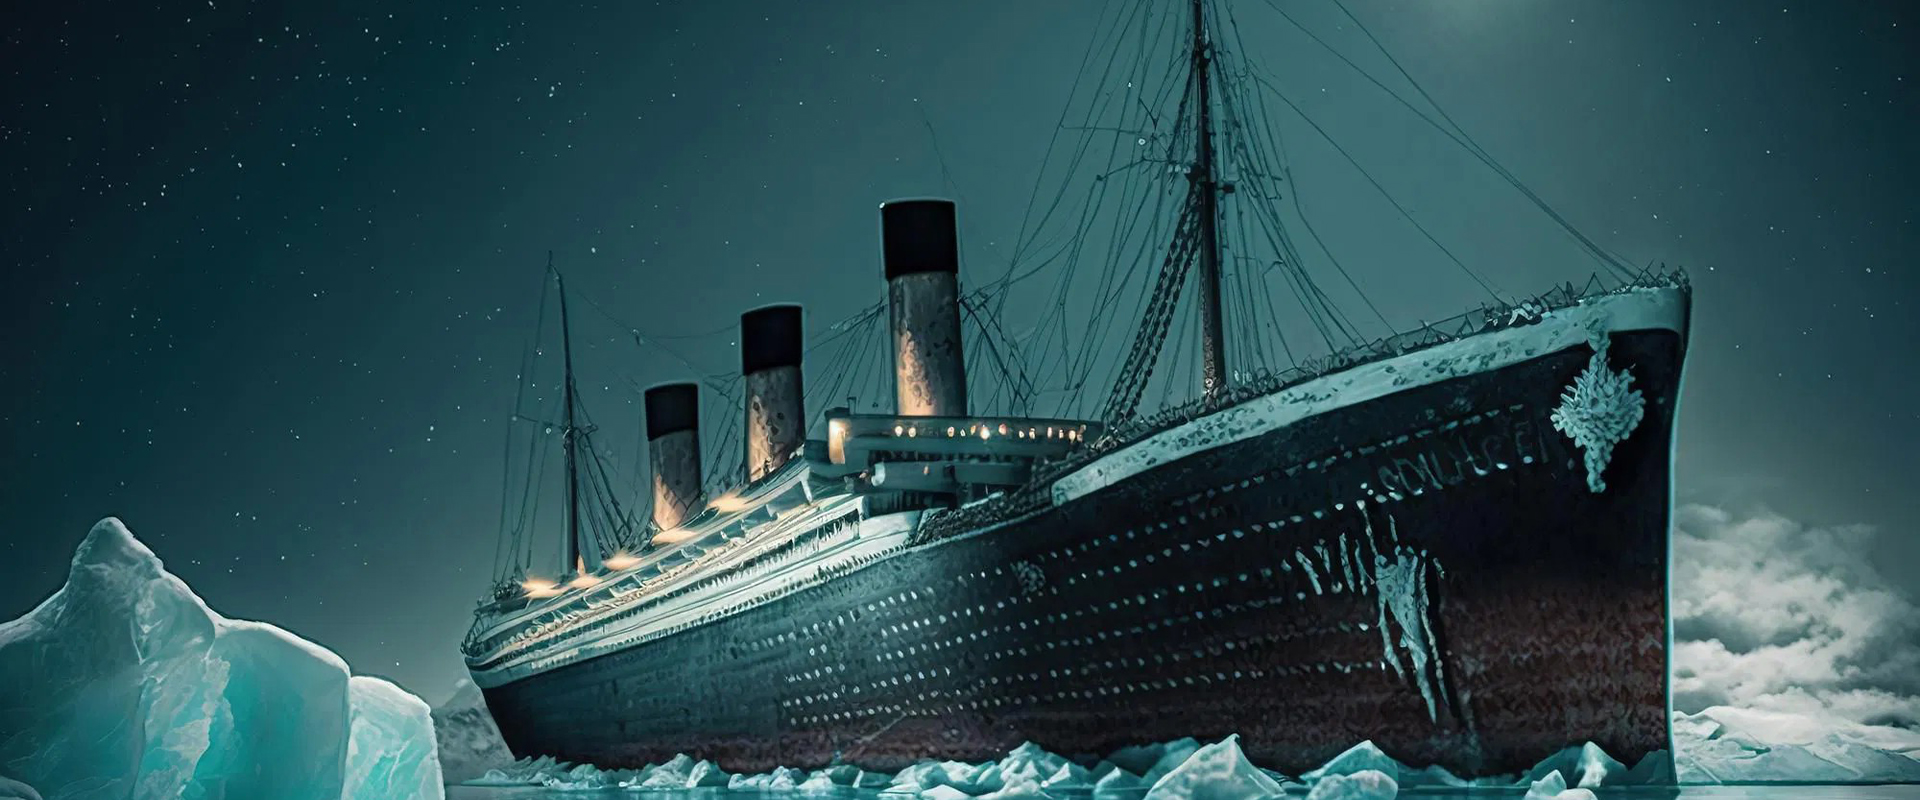 The Truth About the Titanic Has Been Revealed